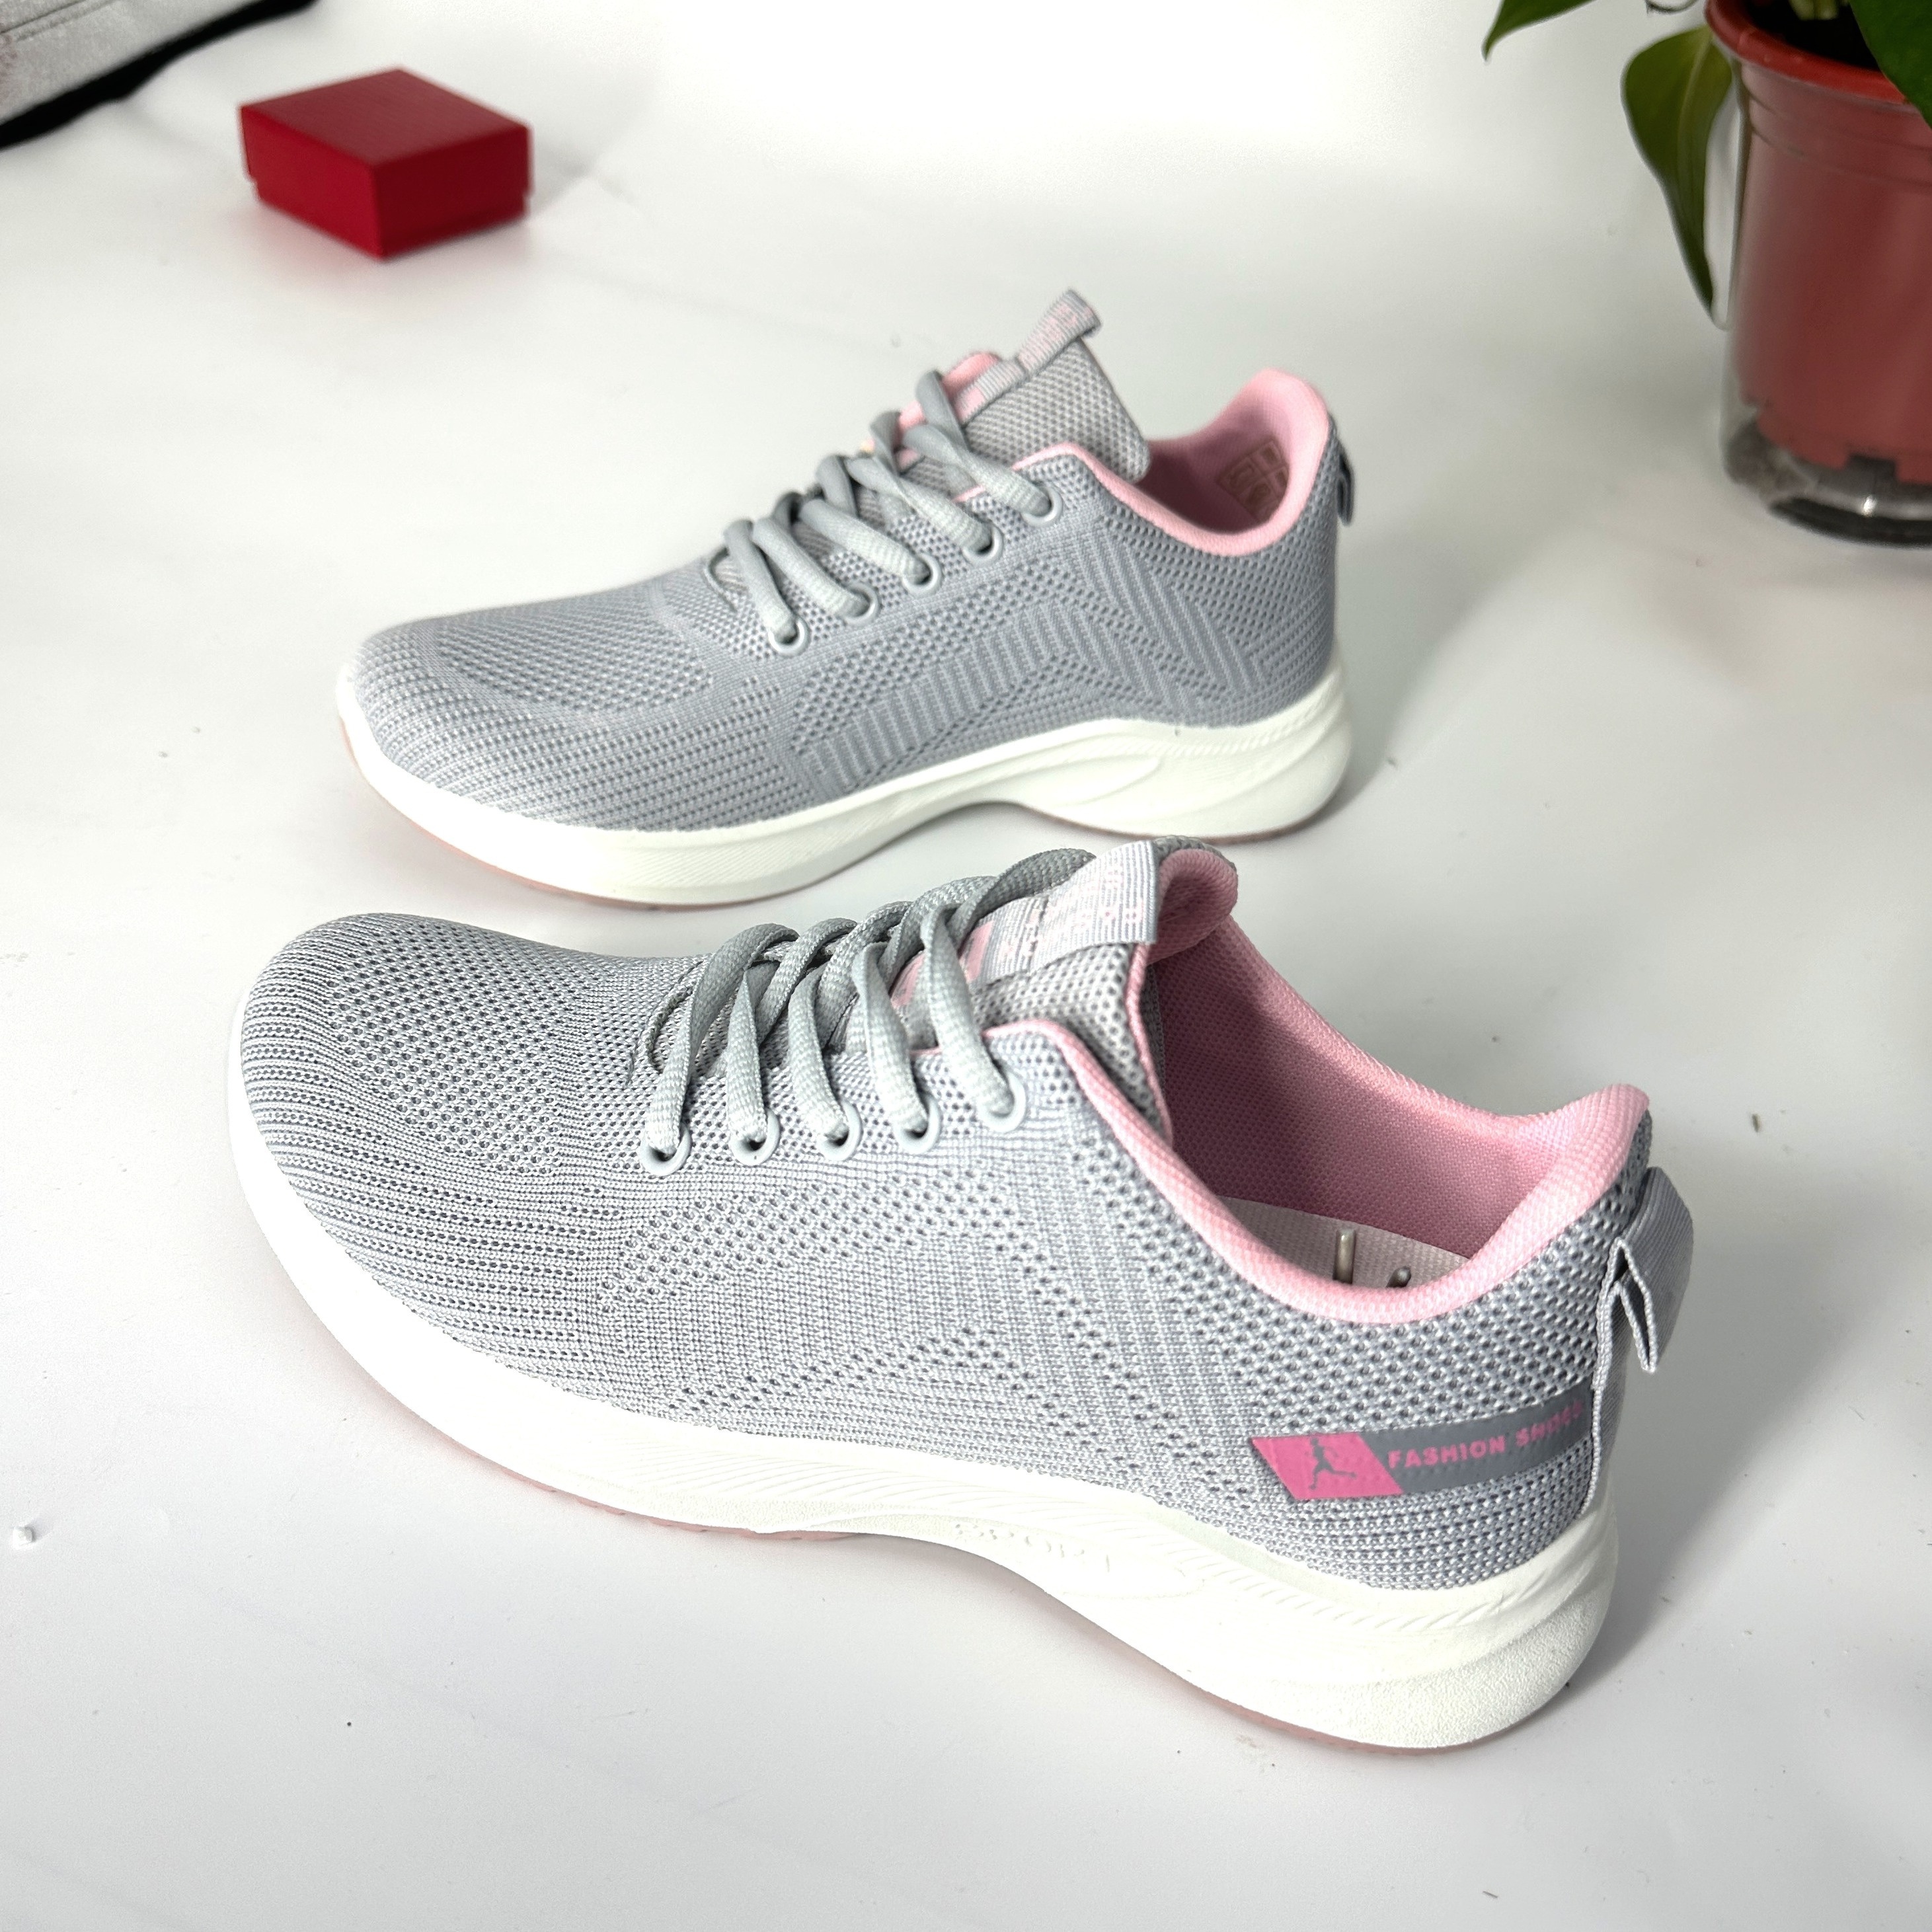 HSMQHJWE Workout Shoes For Women Women's Tennis Running Lightweight Sport  Gym Jogging Breathable Fashion Walking Shoes 